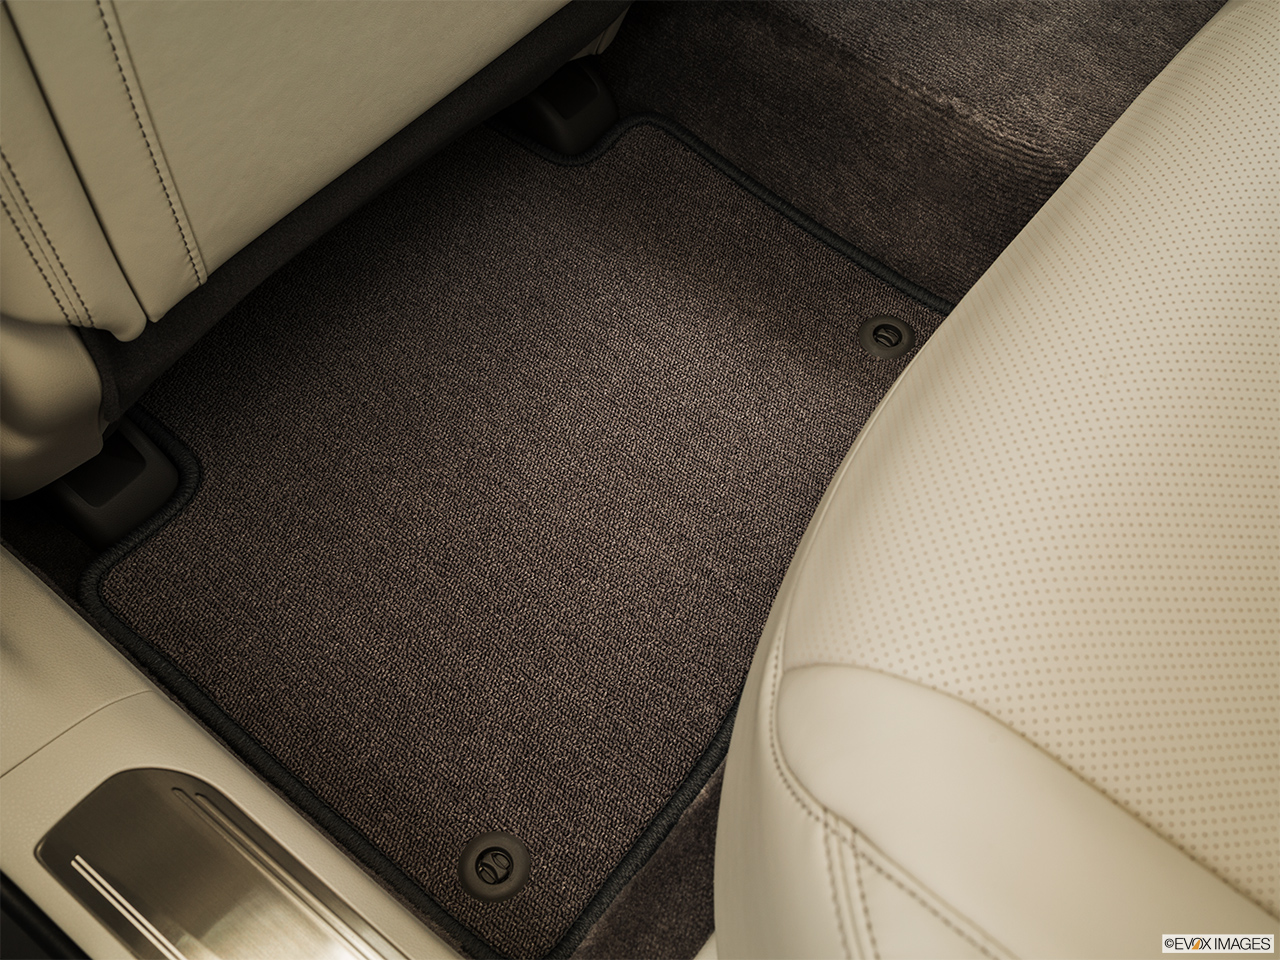 2015 Acura RLX Base Rear driver's side floor mat. Mid-seat level from outside looking in. 